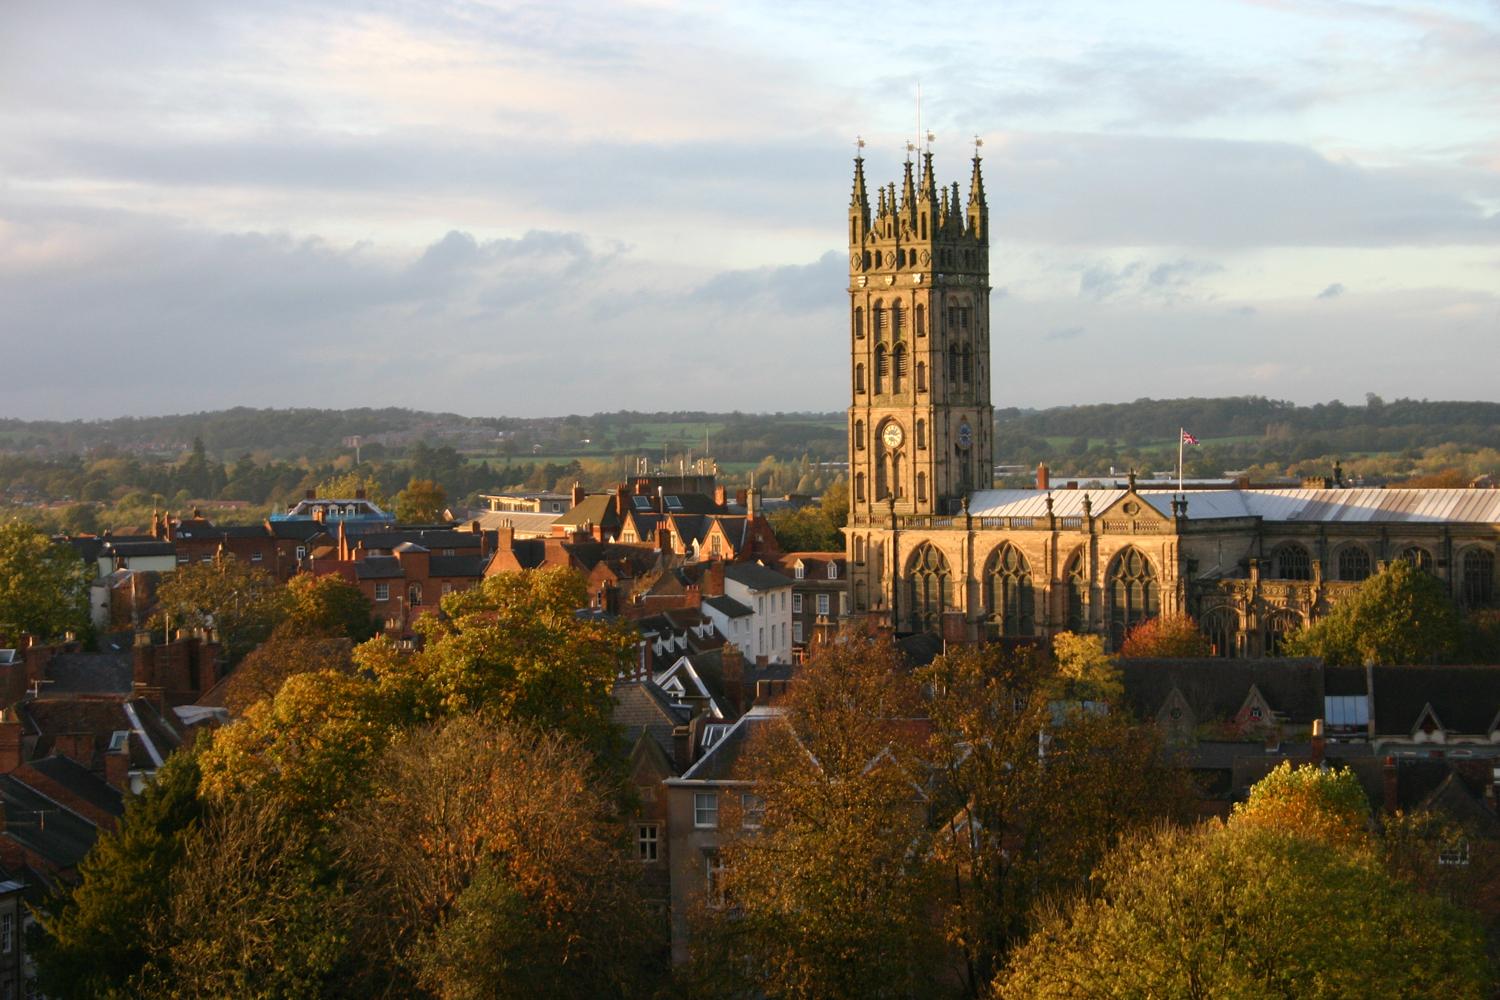 St Mary’s Church in Warwick towers over the rest of the city.